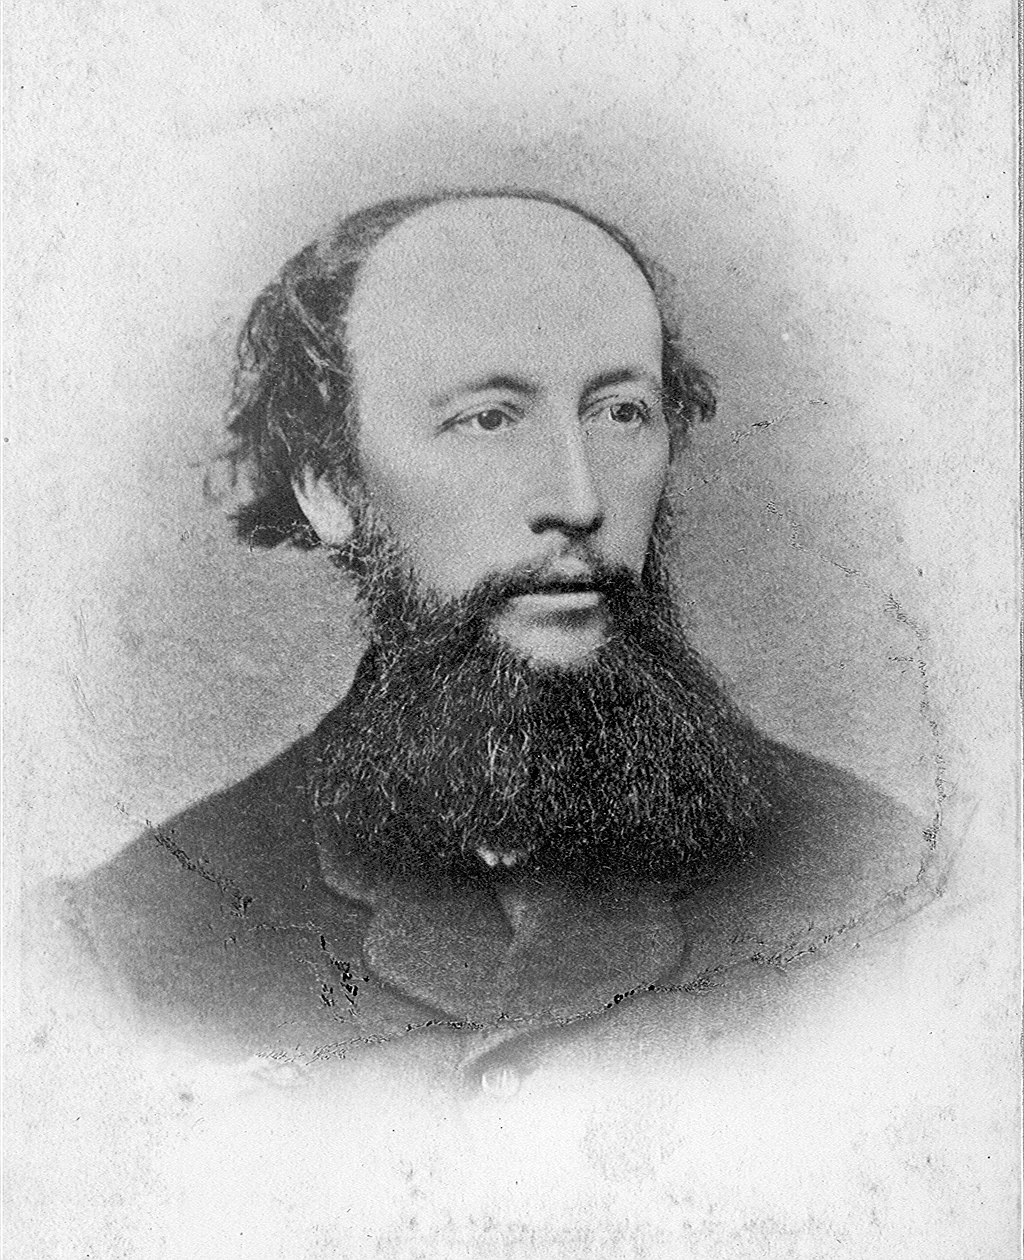 Augustus Newnham Dickens, younger brother of Charles Dickens